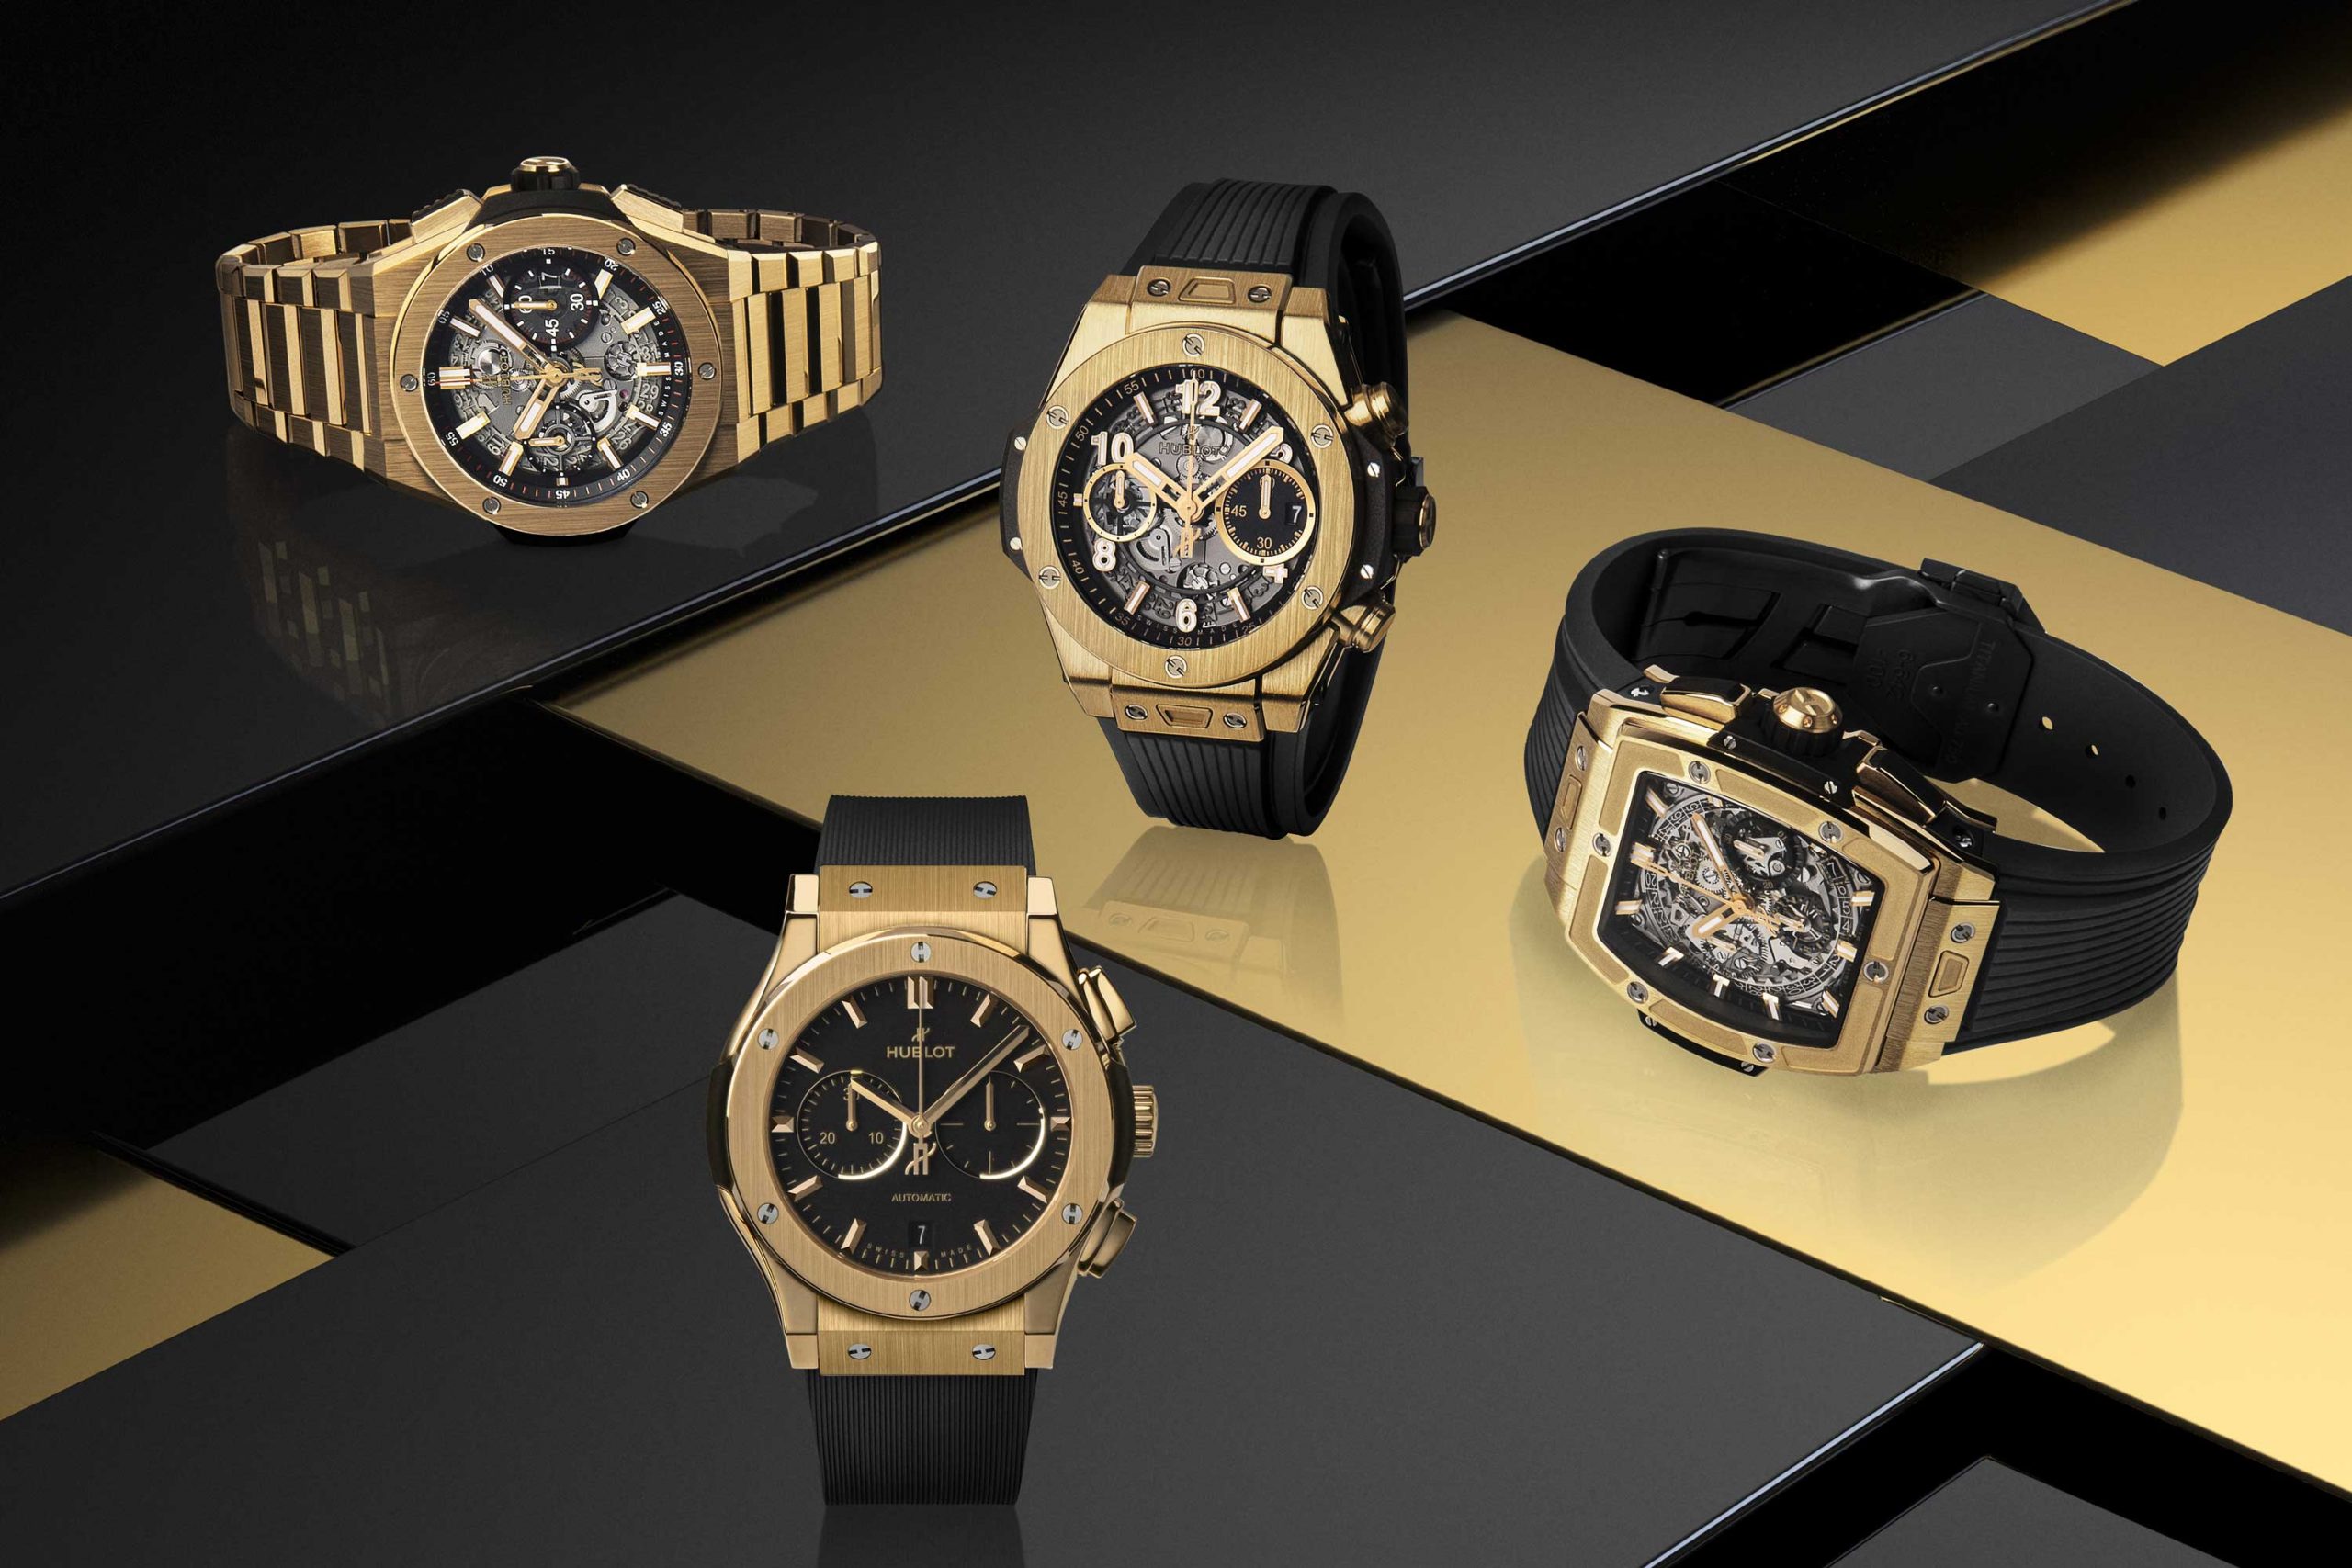 Hublot releases a six-watch collection in yellow gold to celebrate the milestones it has crossed in its 40 plus year history